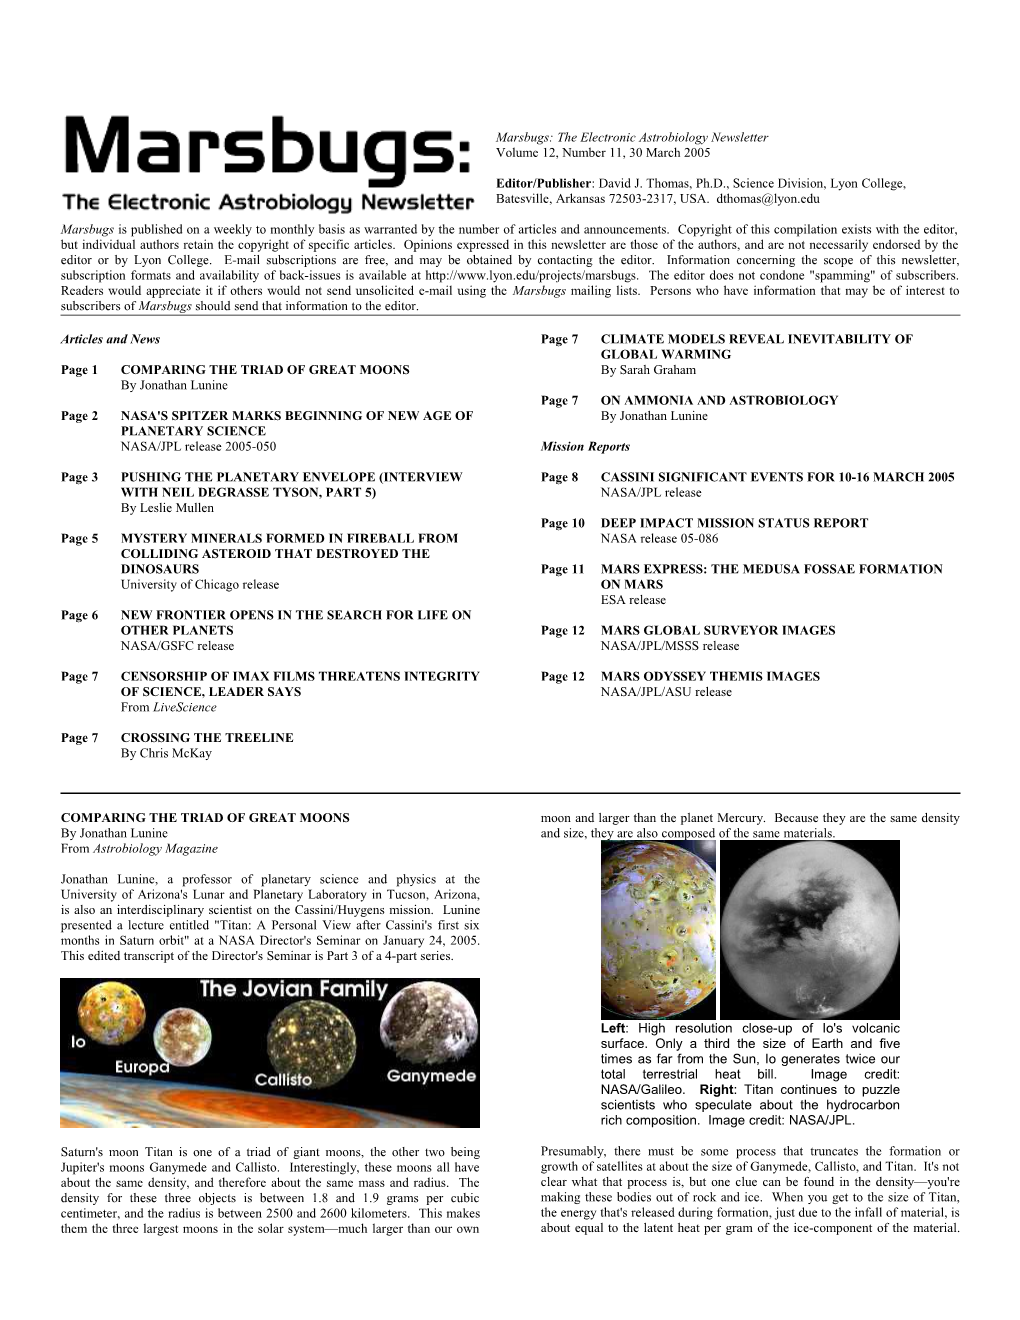 Marsbugs: the Electronic Astrobiology Newsletter , Volume 12, Number 11, 30 March 2005